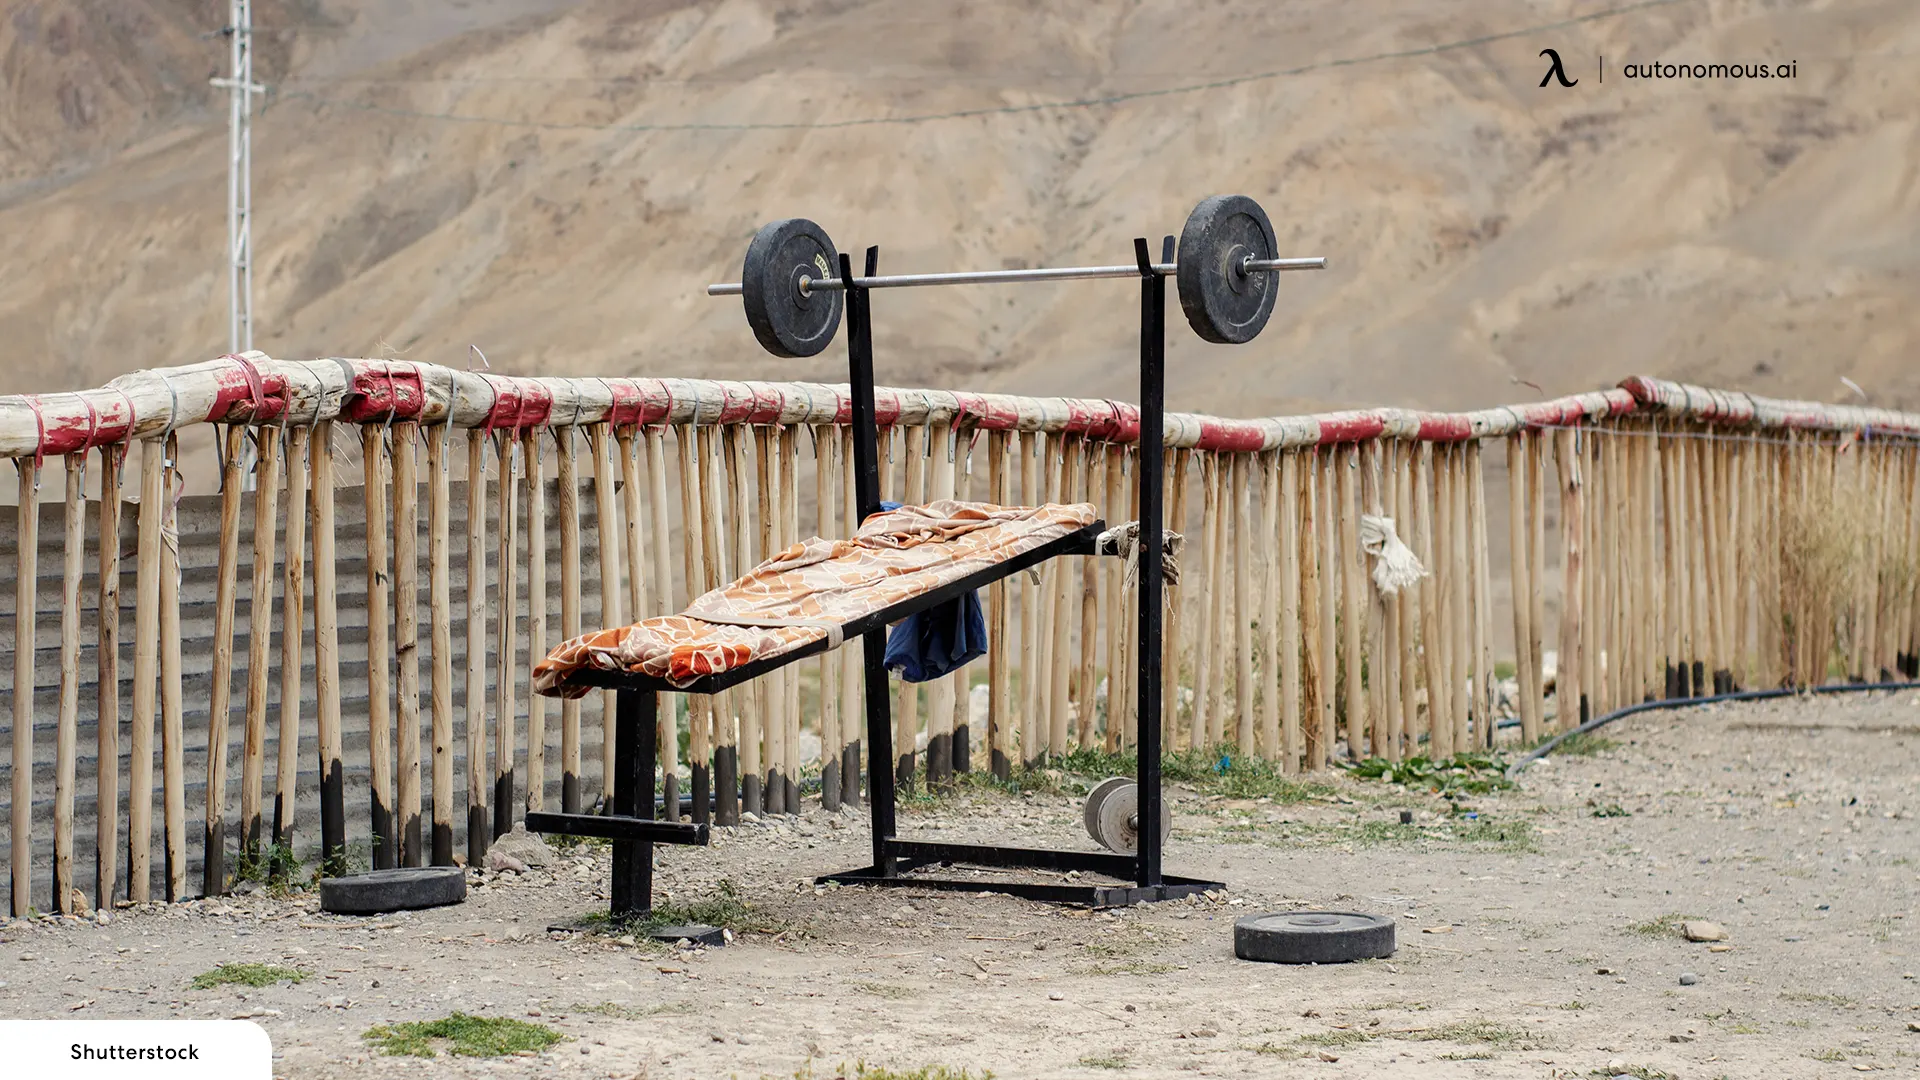 What Gym Equipment Should Always Be Covered?